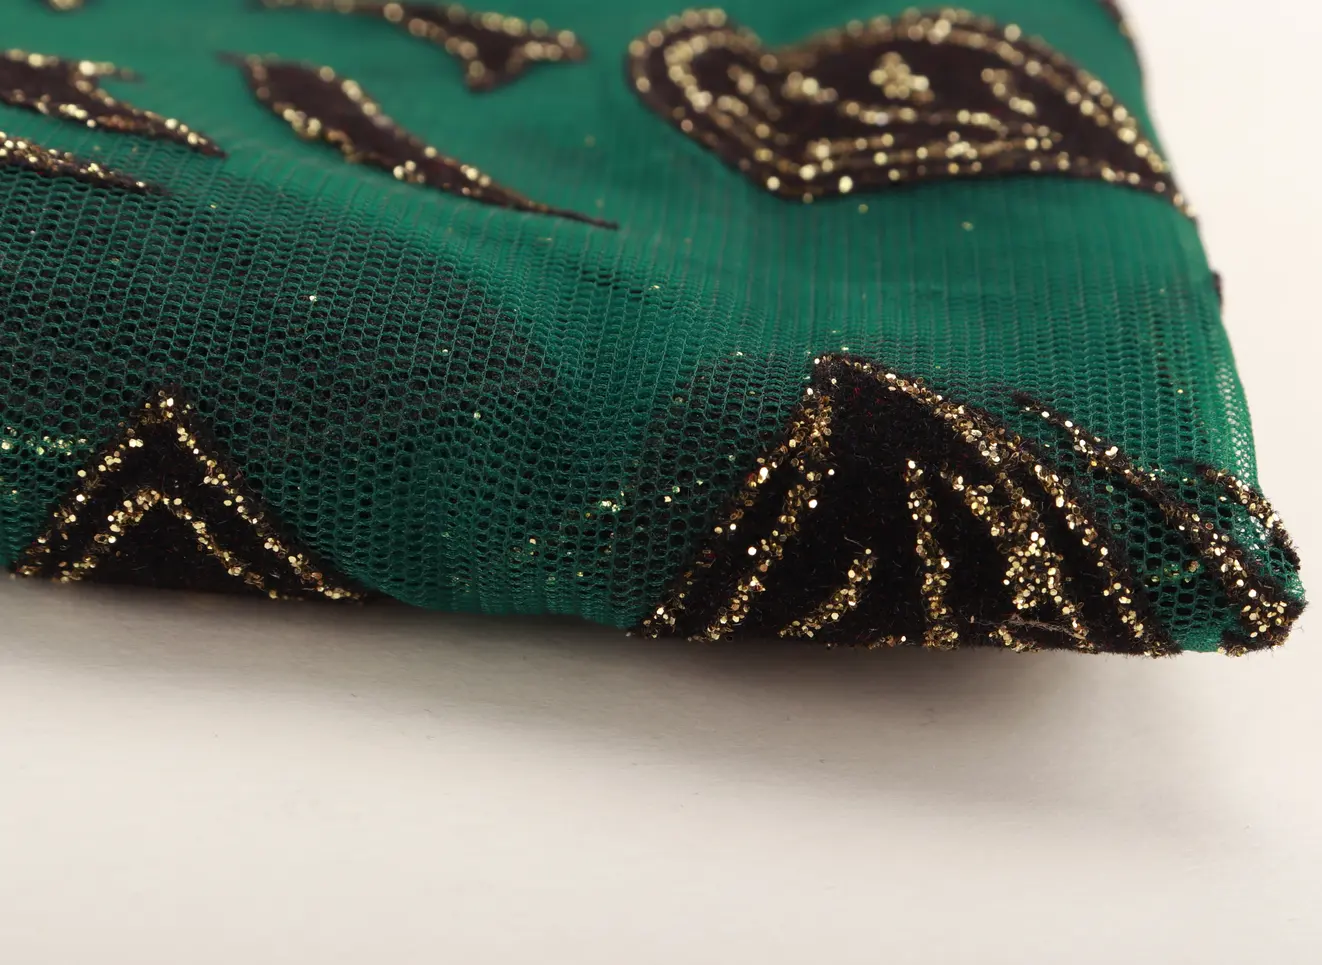 The latest design of gold-rimmed black leaf patch green printed tulle fabric 100% polyester banquet wedding dress fabric